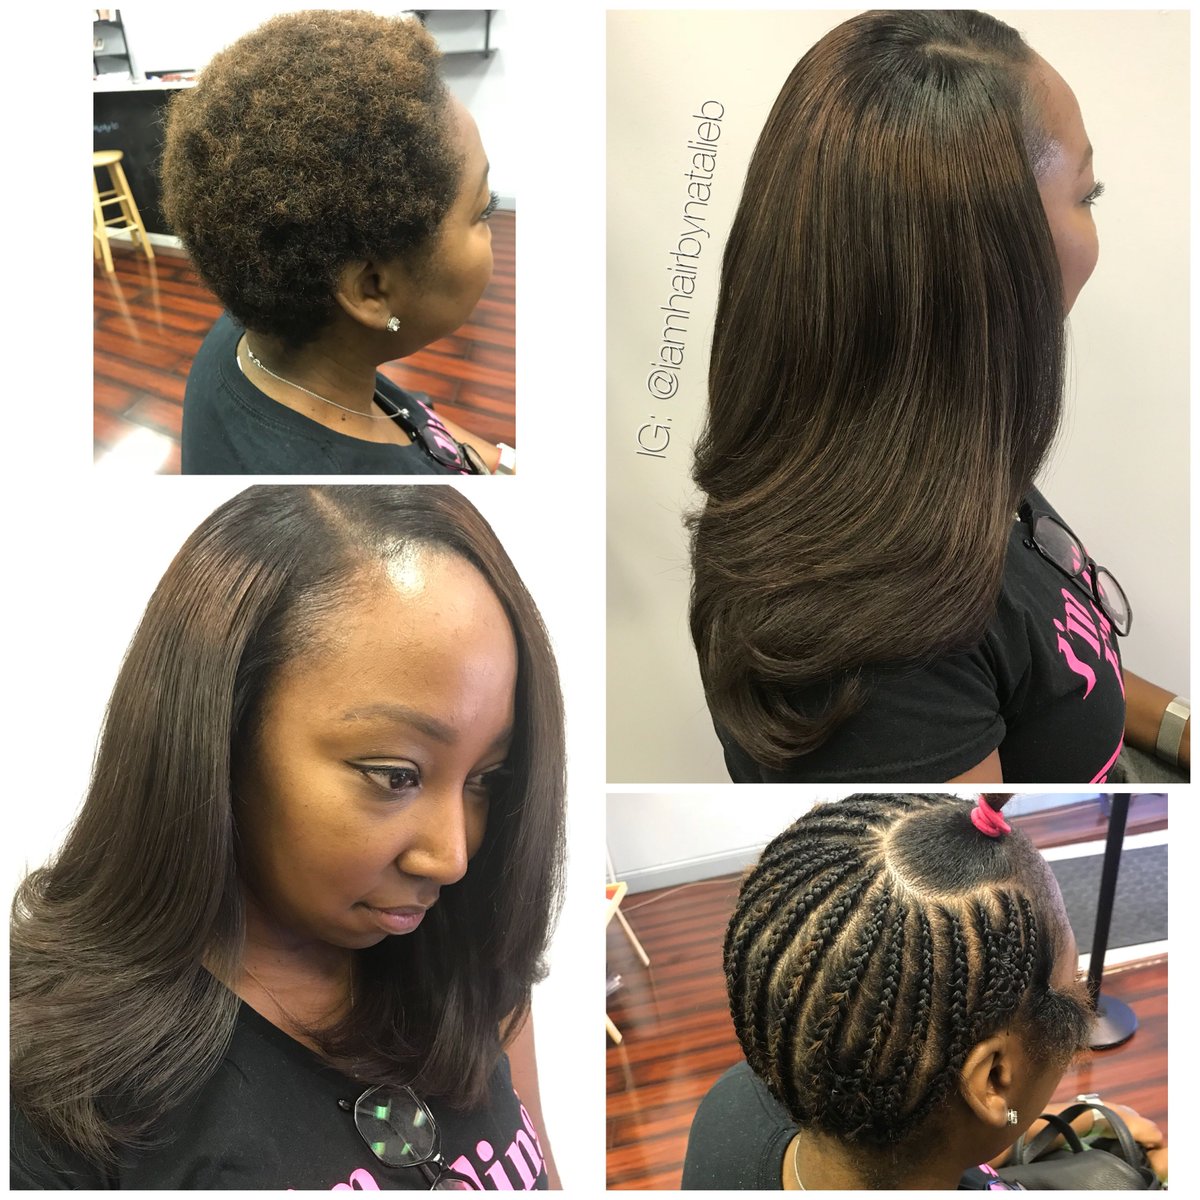 A weave "install" involves cornrowing a wearer's hair, then sewing the false hair into the braids in curtain-like rows. professional stylists can make this look extremely natural with "leave-out," letting hair around the planned part stay unbraided so some scalp is visible.